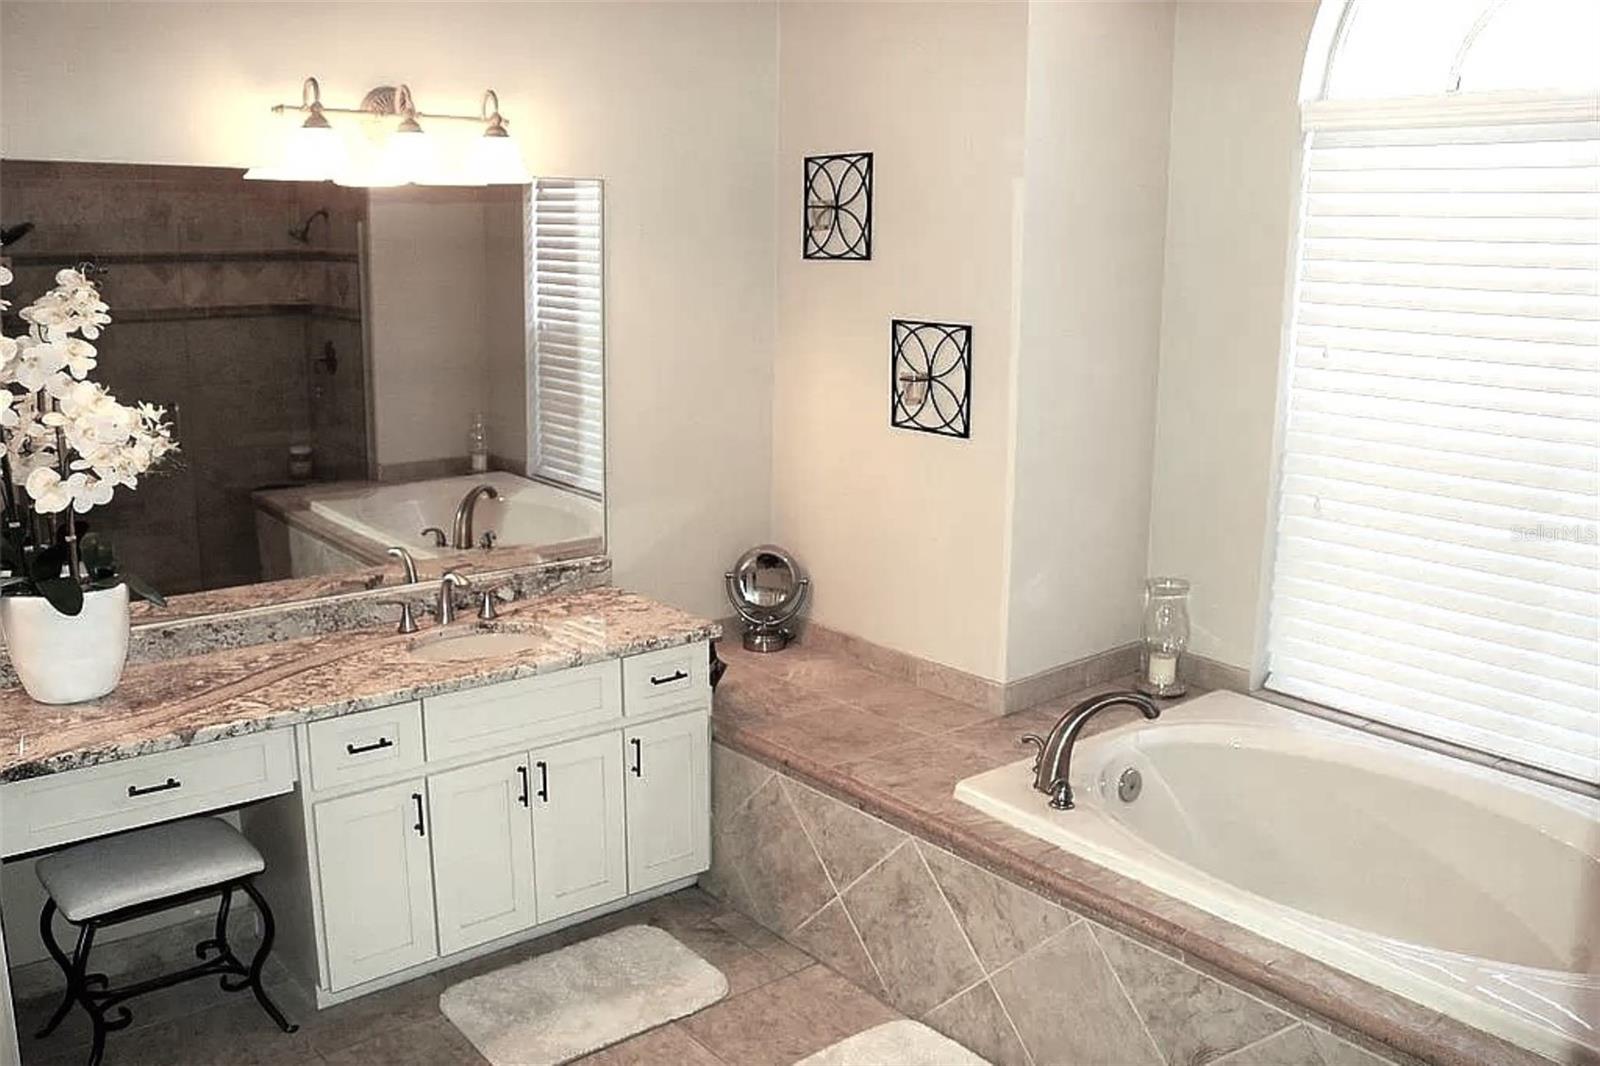 Light the candles and Relax in a bath, master bathroom